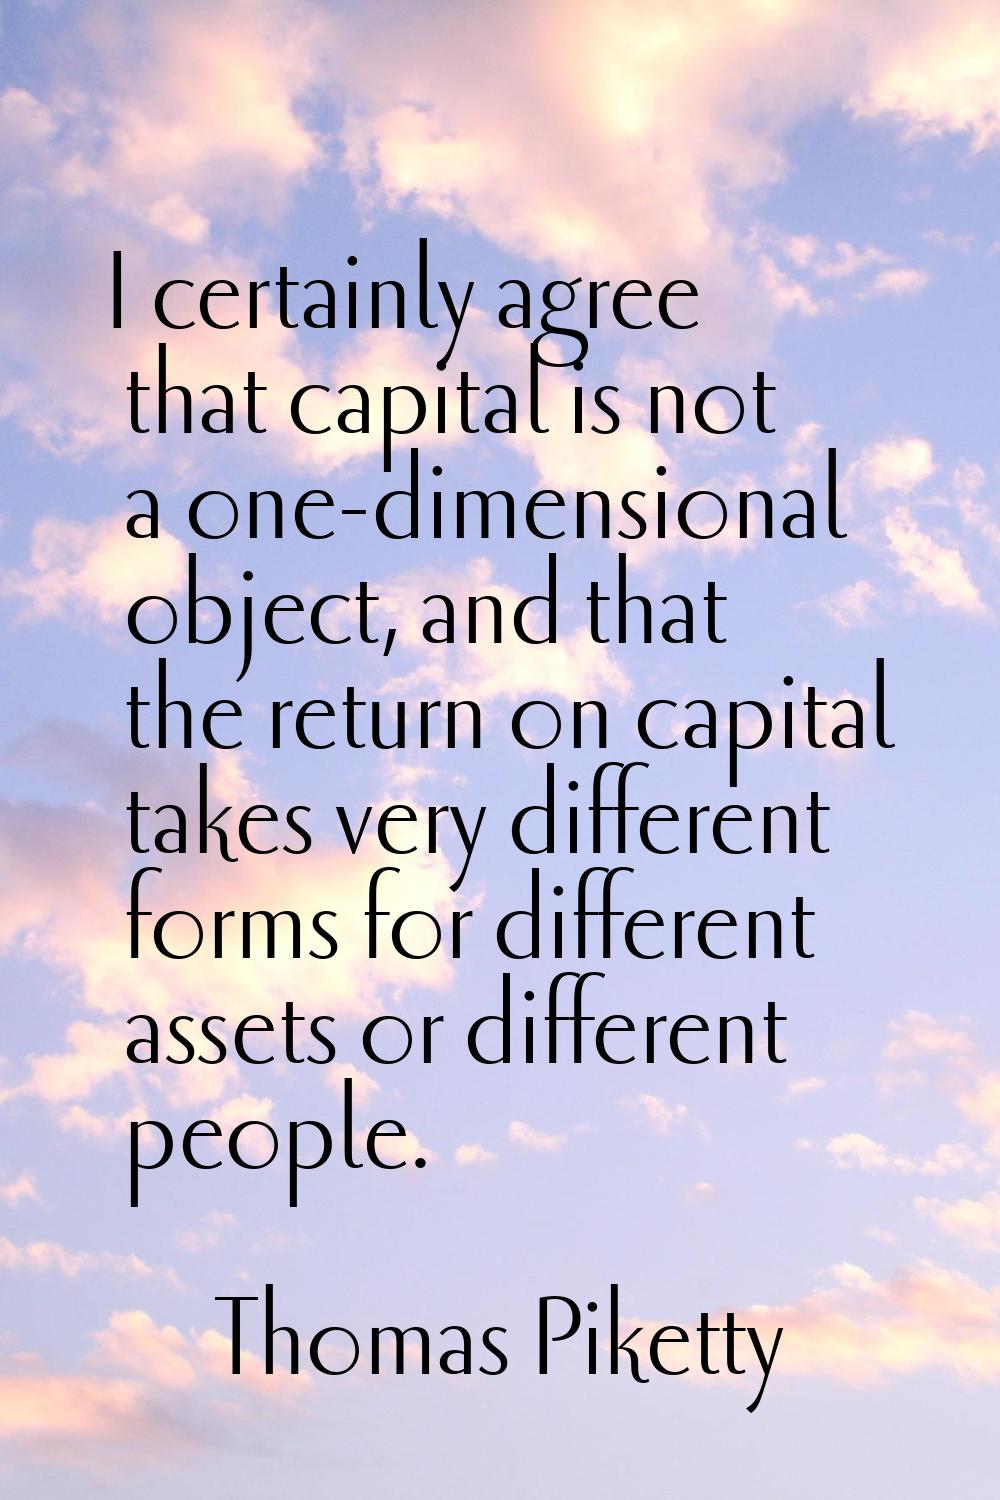 I certainly agree that capital is not a one-dimensional object, and that the return on capital take